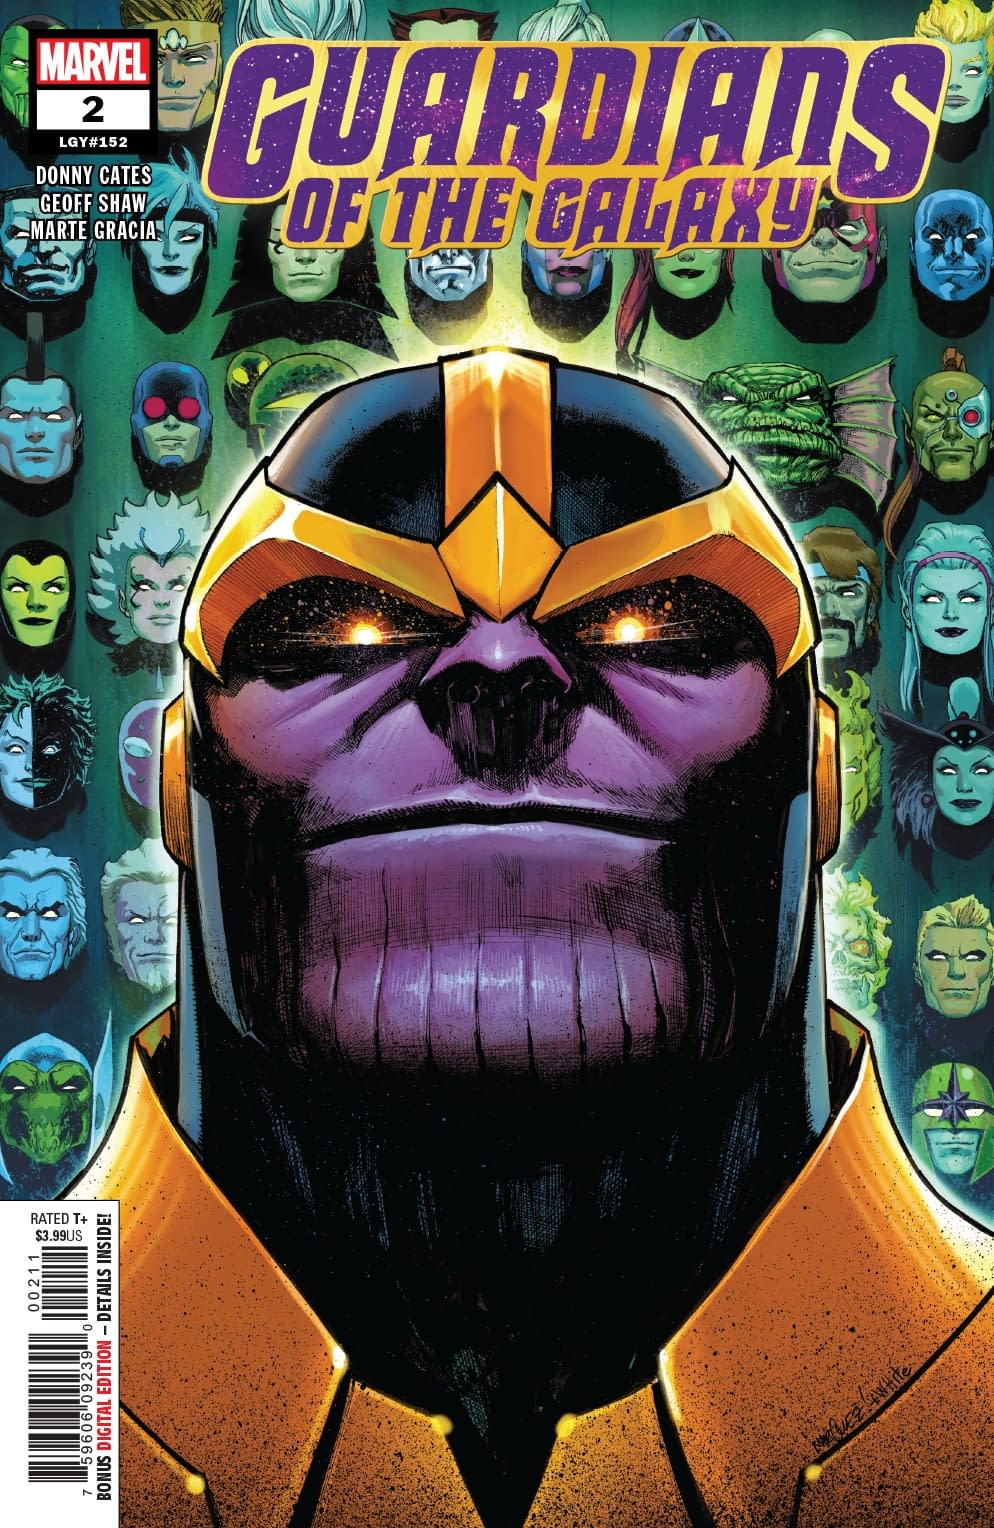 Drunk Dialing Kitty Pryde at 4AM in Next Week's Guardians of the Galaxy #2 (Preview)